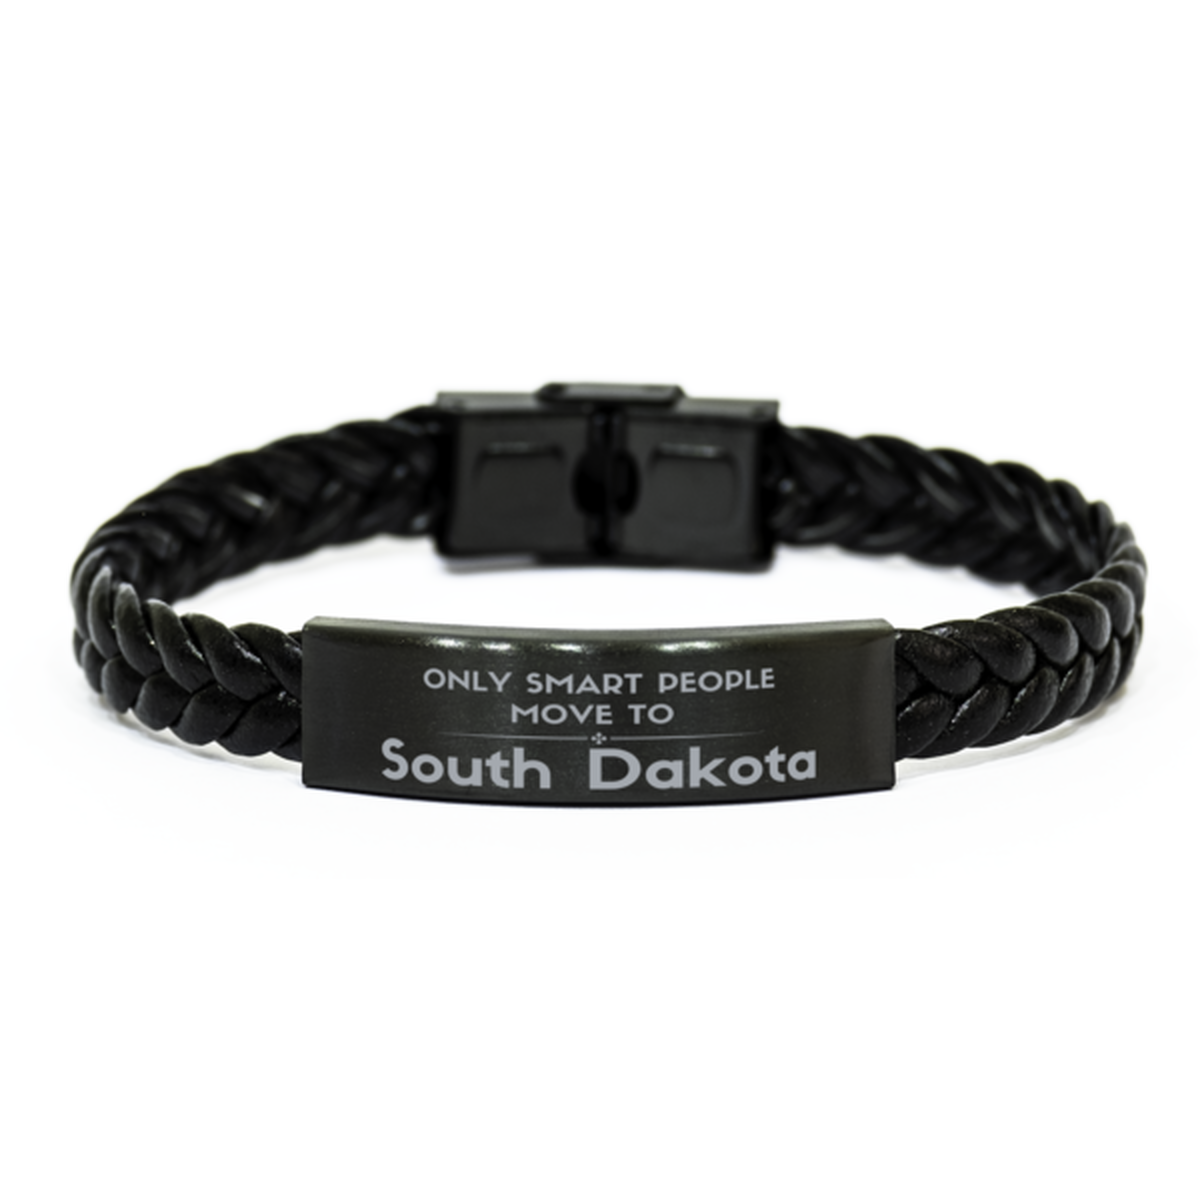 Only smart people move to South Dakota Braided Leather Bracelet, Gag Gifts For South Dakota, Move to South Dakota Gifts for Friends Coworker Funny Saying Quote